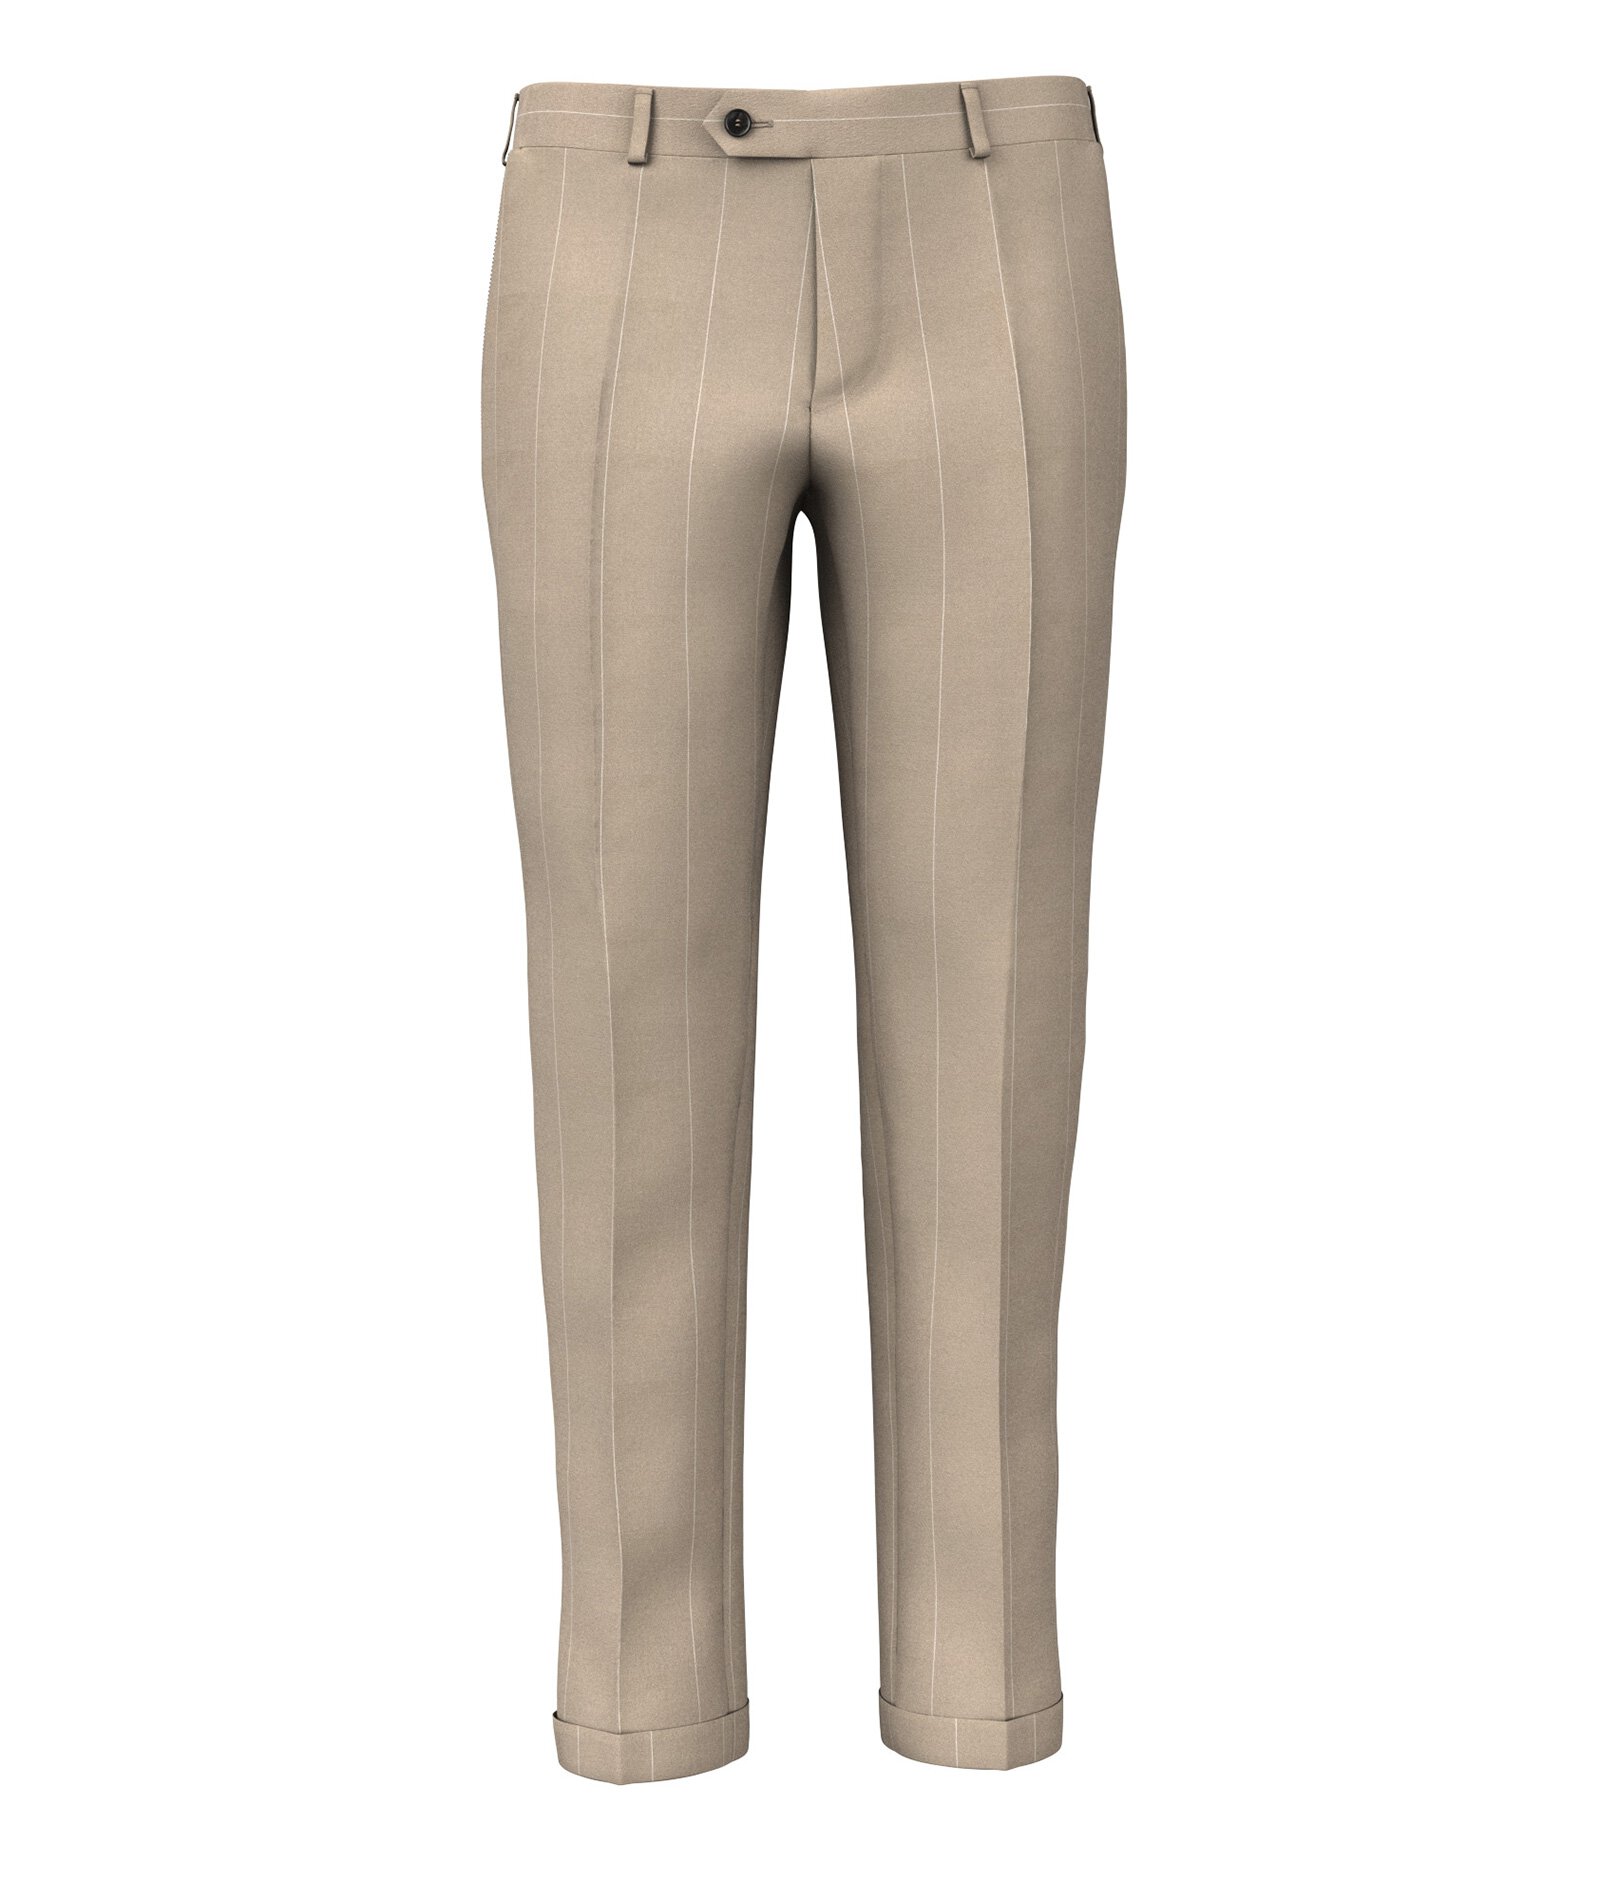 Trousers  Mens Clothing  Chinos  Mens Trousers  Tapered Fit Trousers   Slim Fit Trousers  Formal Trousers  Party Wear Trousers  Casual  Trousers  Tailor Made Trousers  Made to Measure Trousers  Custom  Tailored Trousers